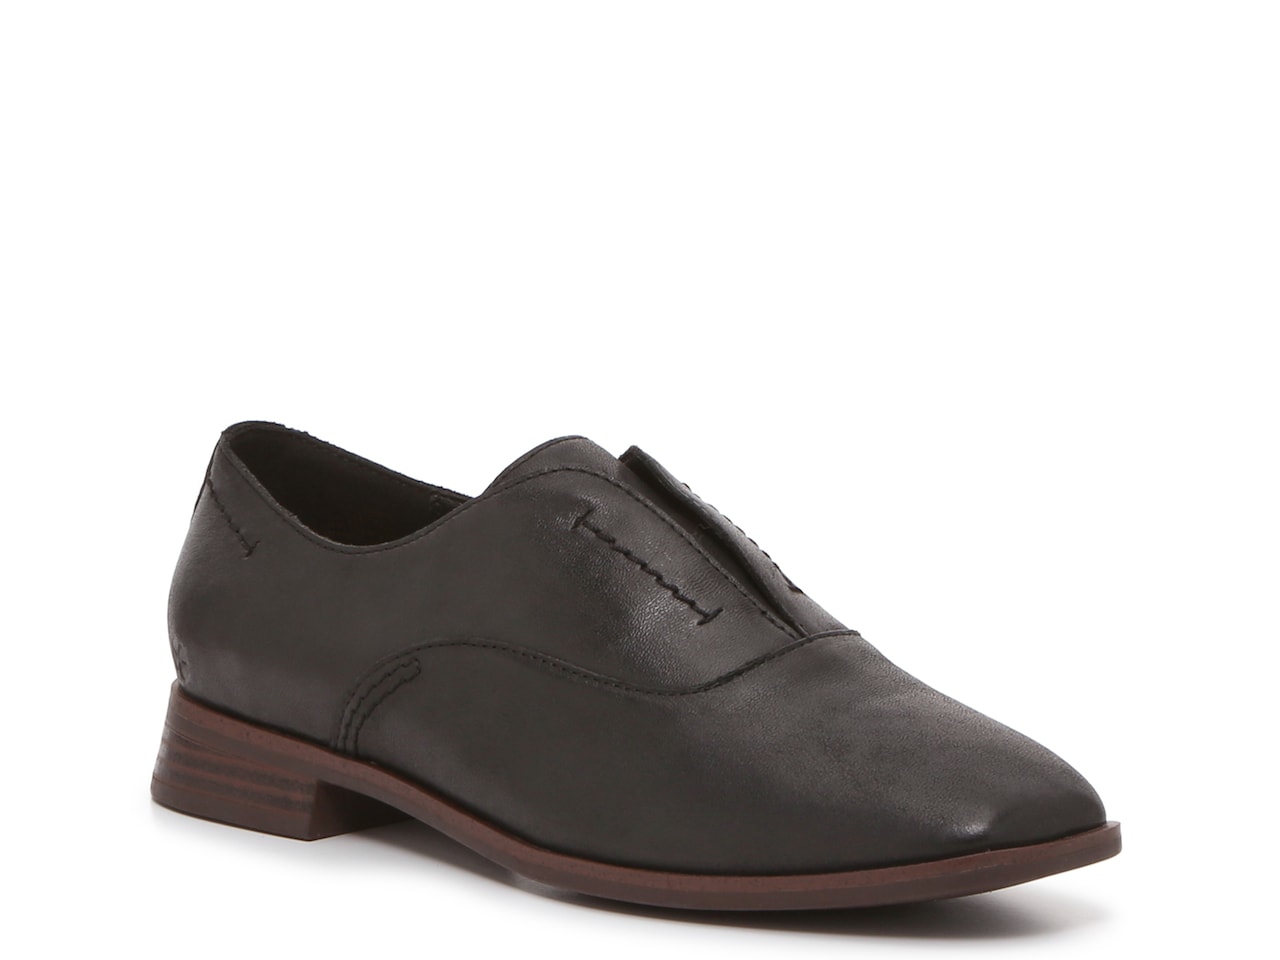 Lucky Brand Women's Lusman Slip-On Shoes (Black) $22.49 + Free Shipping